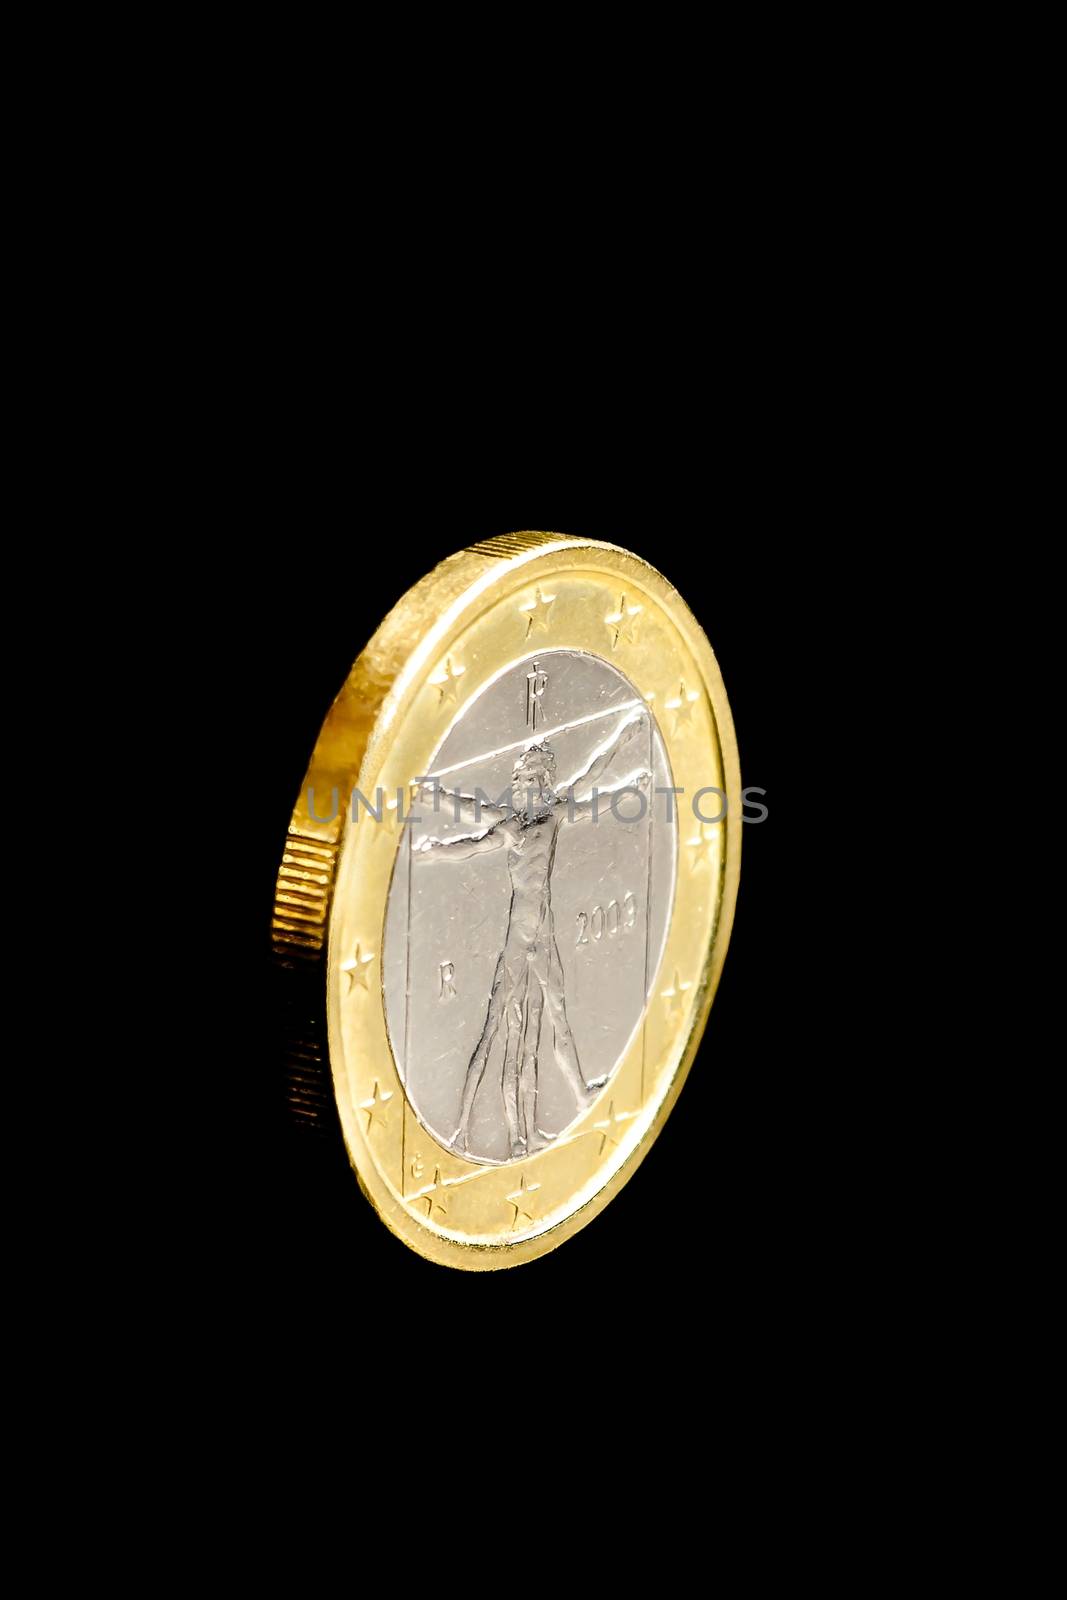 One euro coin isolated on black background